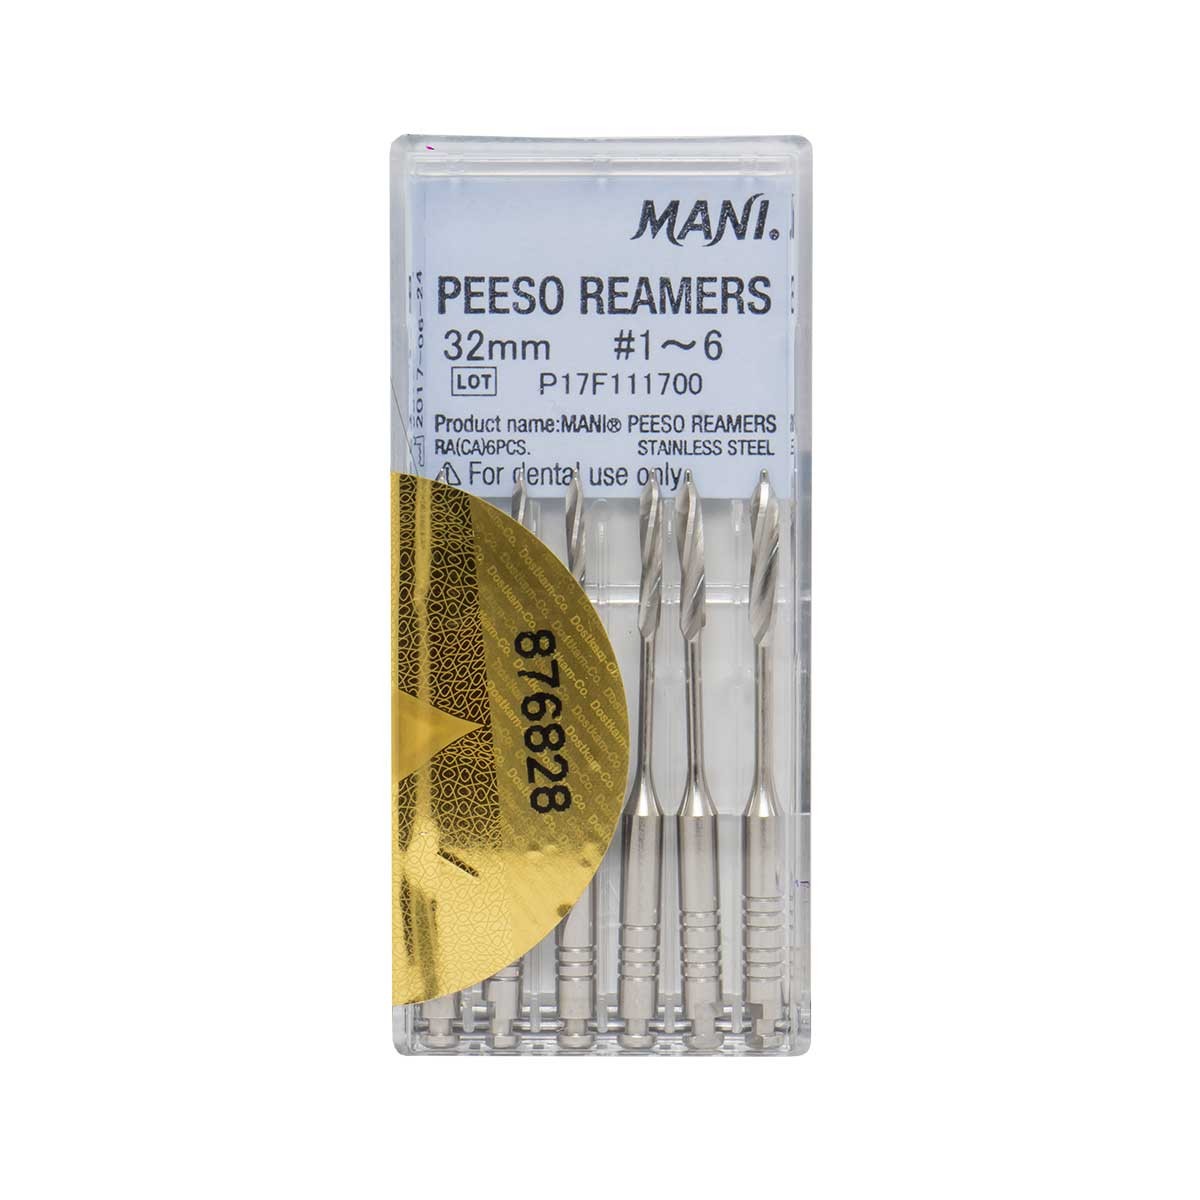 Mani-Peeso-Reamers-32mm-Ass1-6-1200x1200